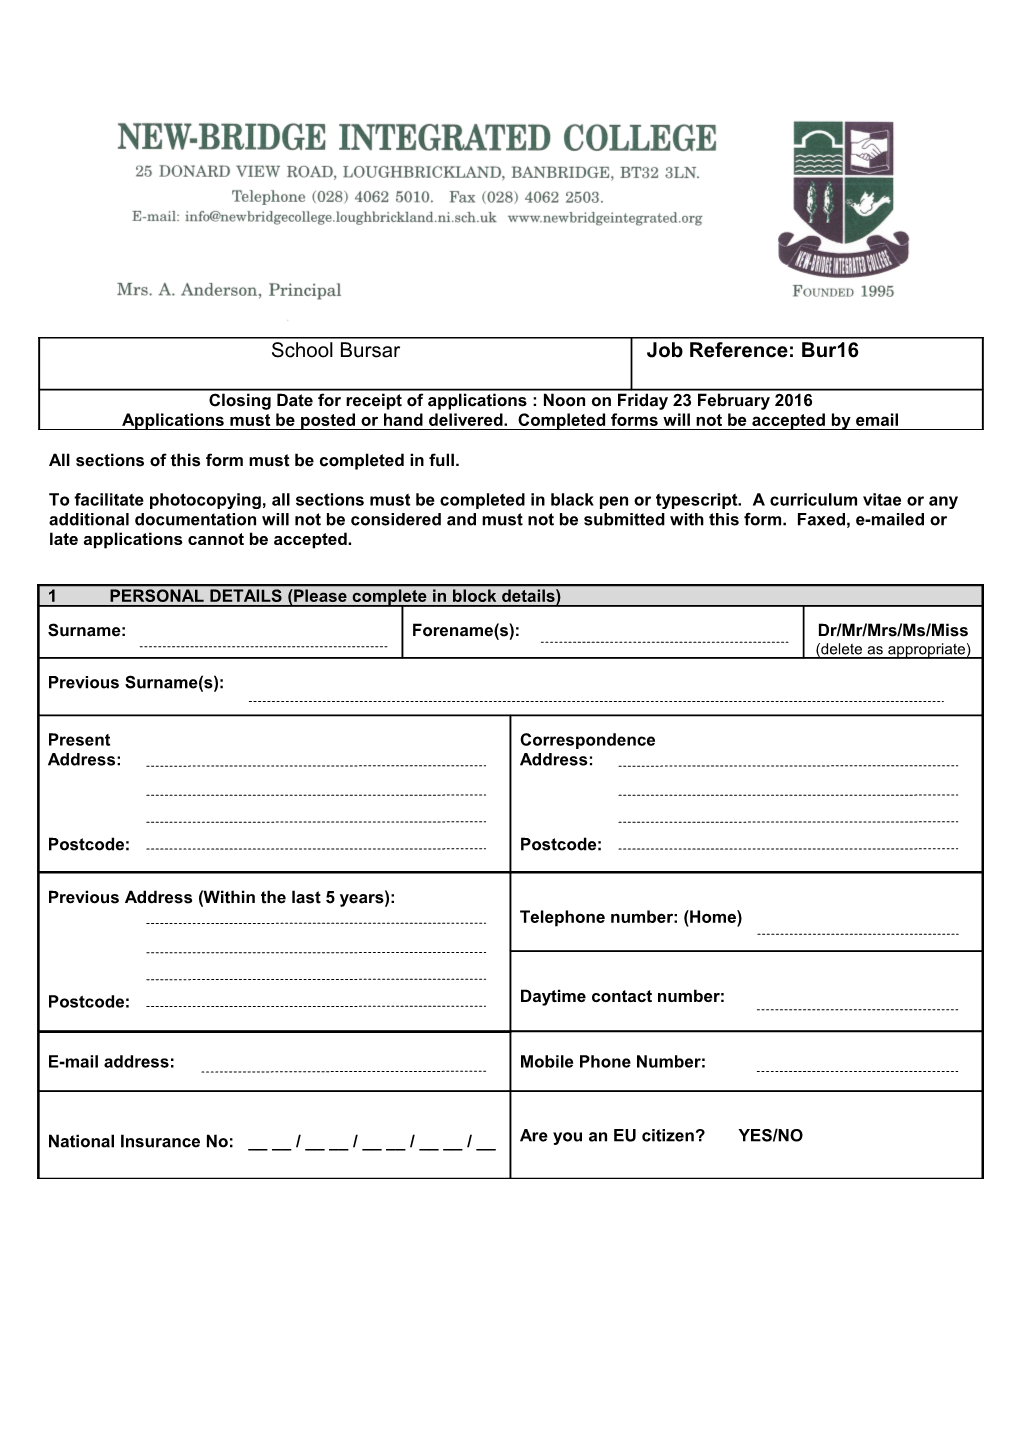 All Sections of This Form Must Be Completed in Full